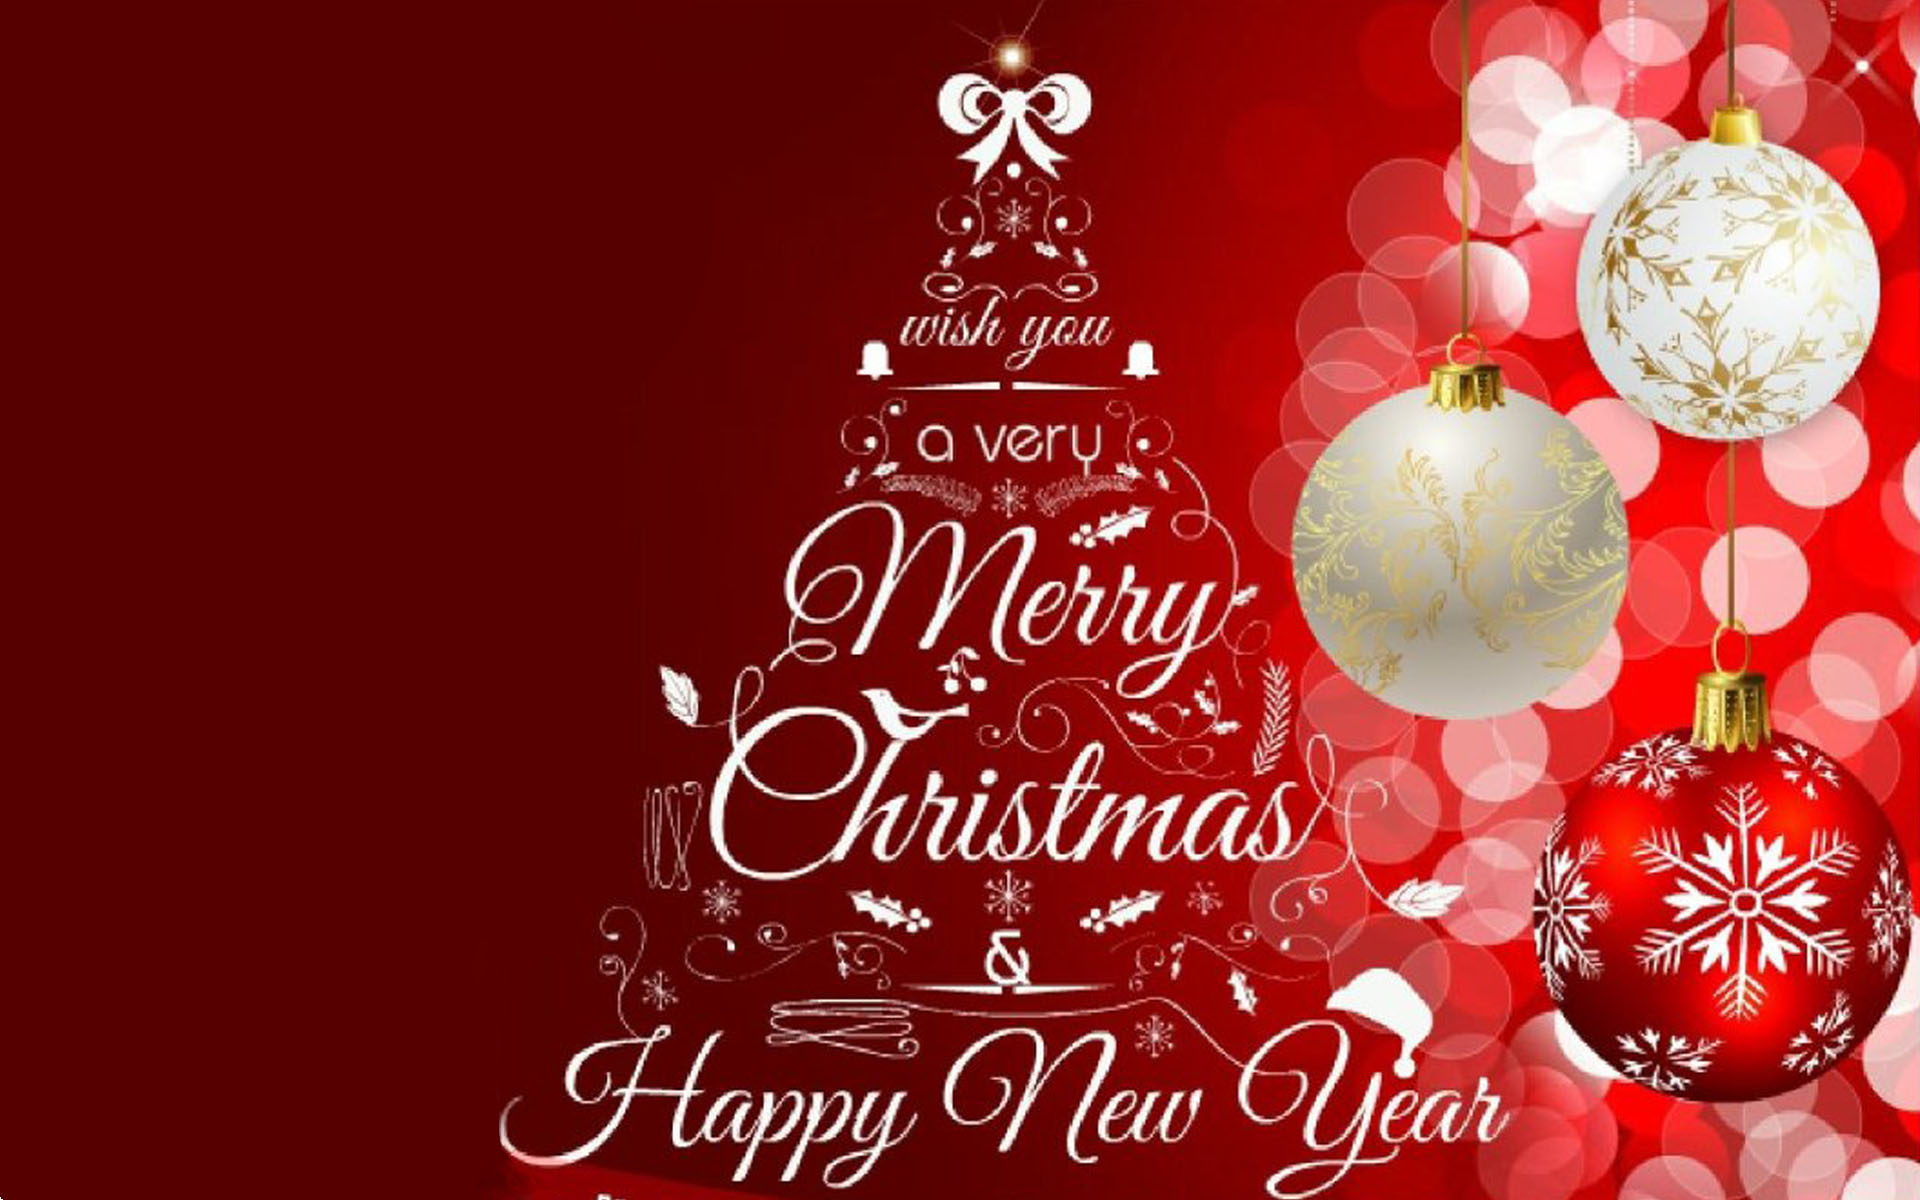 48+ Merry Christmas Wishes Pictures 2021